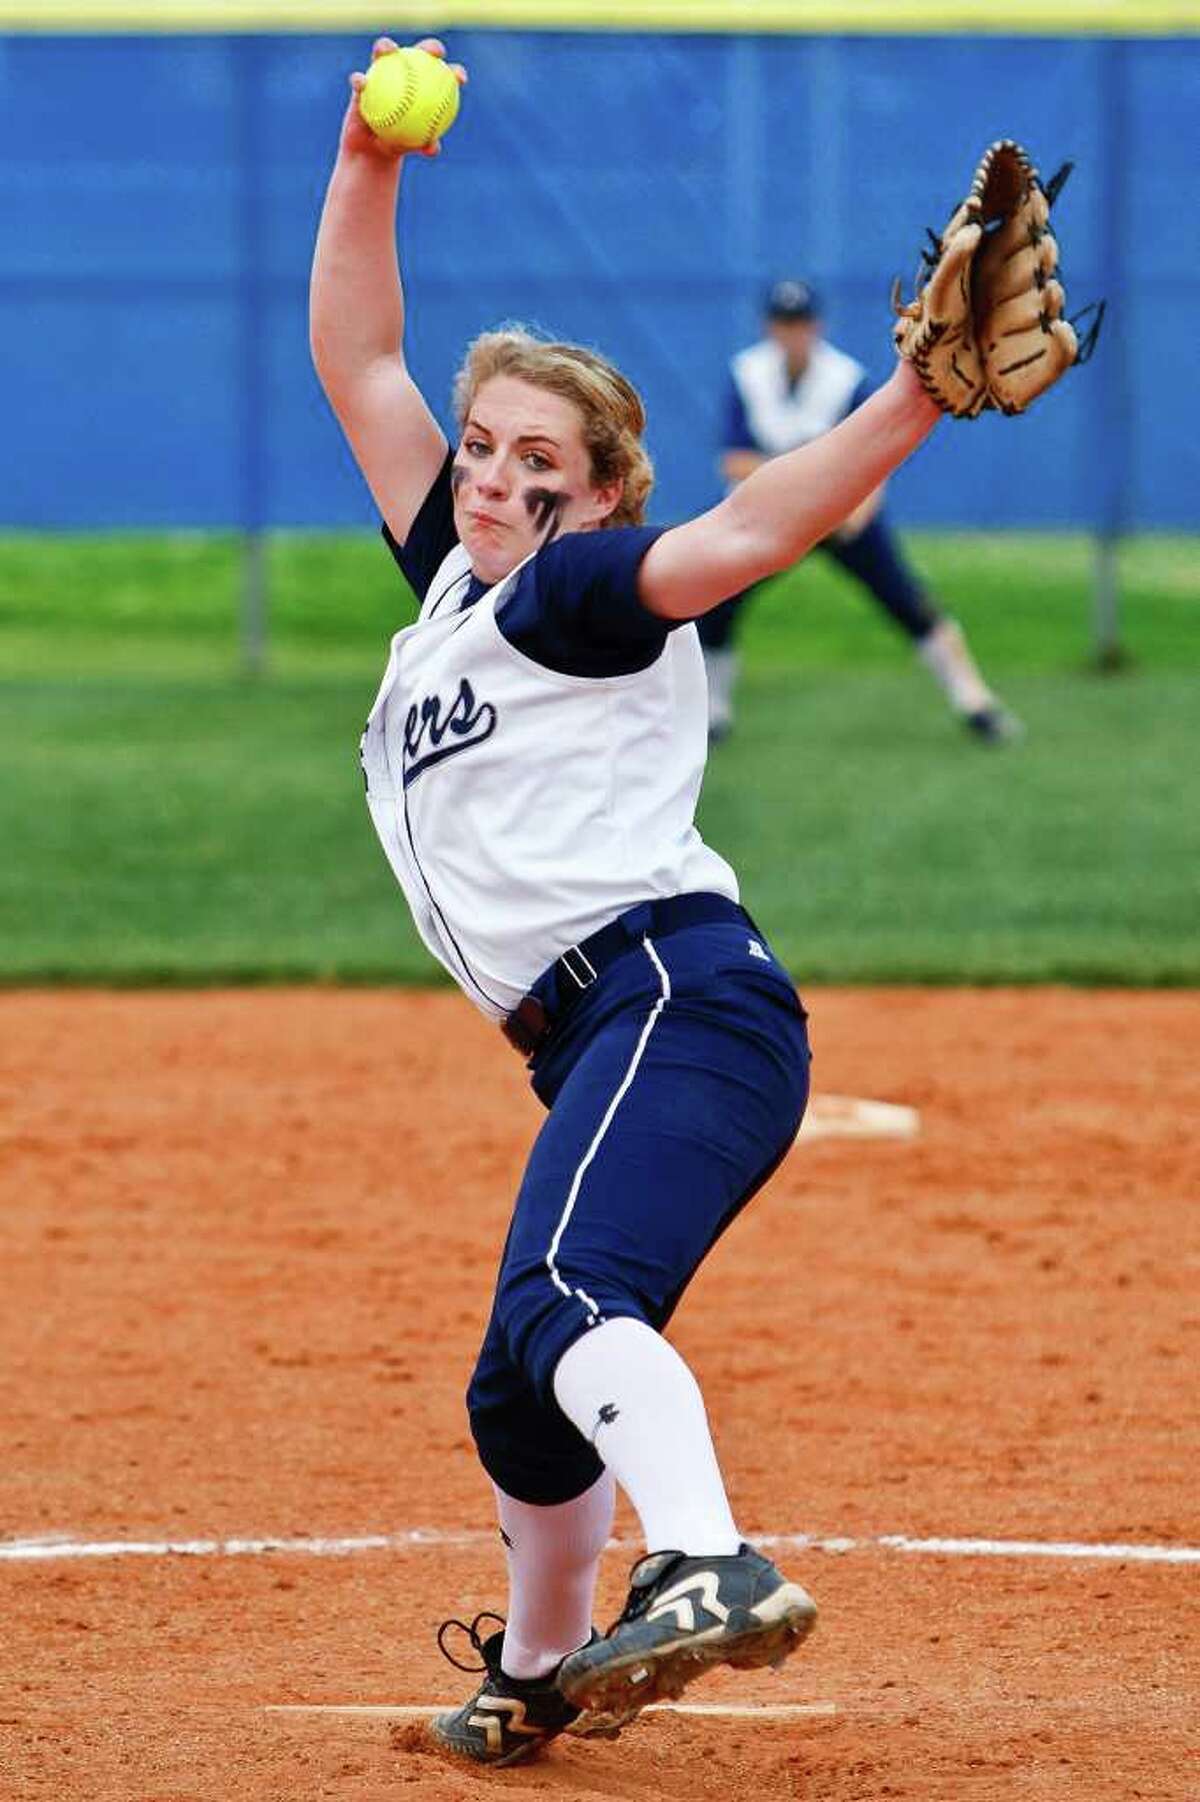 Smithson Valley's Regan Mergele winds up for a pitch during their game with Clemens at the Clemens softball field on March 15, 2012. Smithson Valley won the game 10-0 in five innings. Photo by Marvin Pfeiffer / Prime Time Newspapers